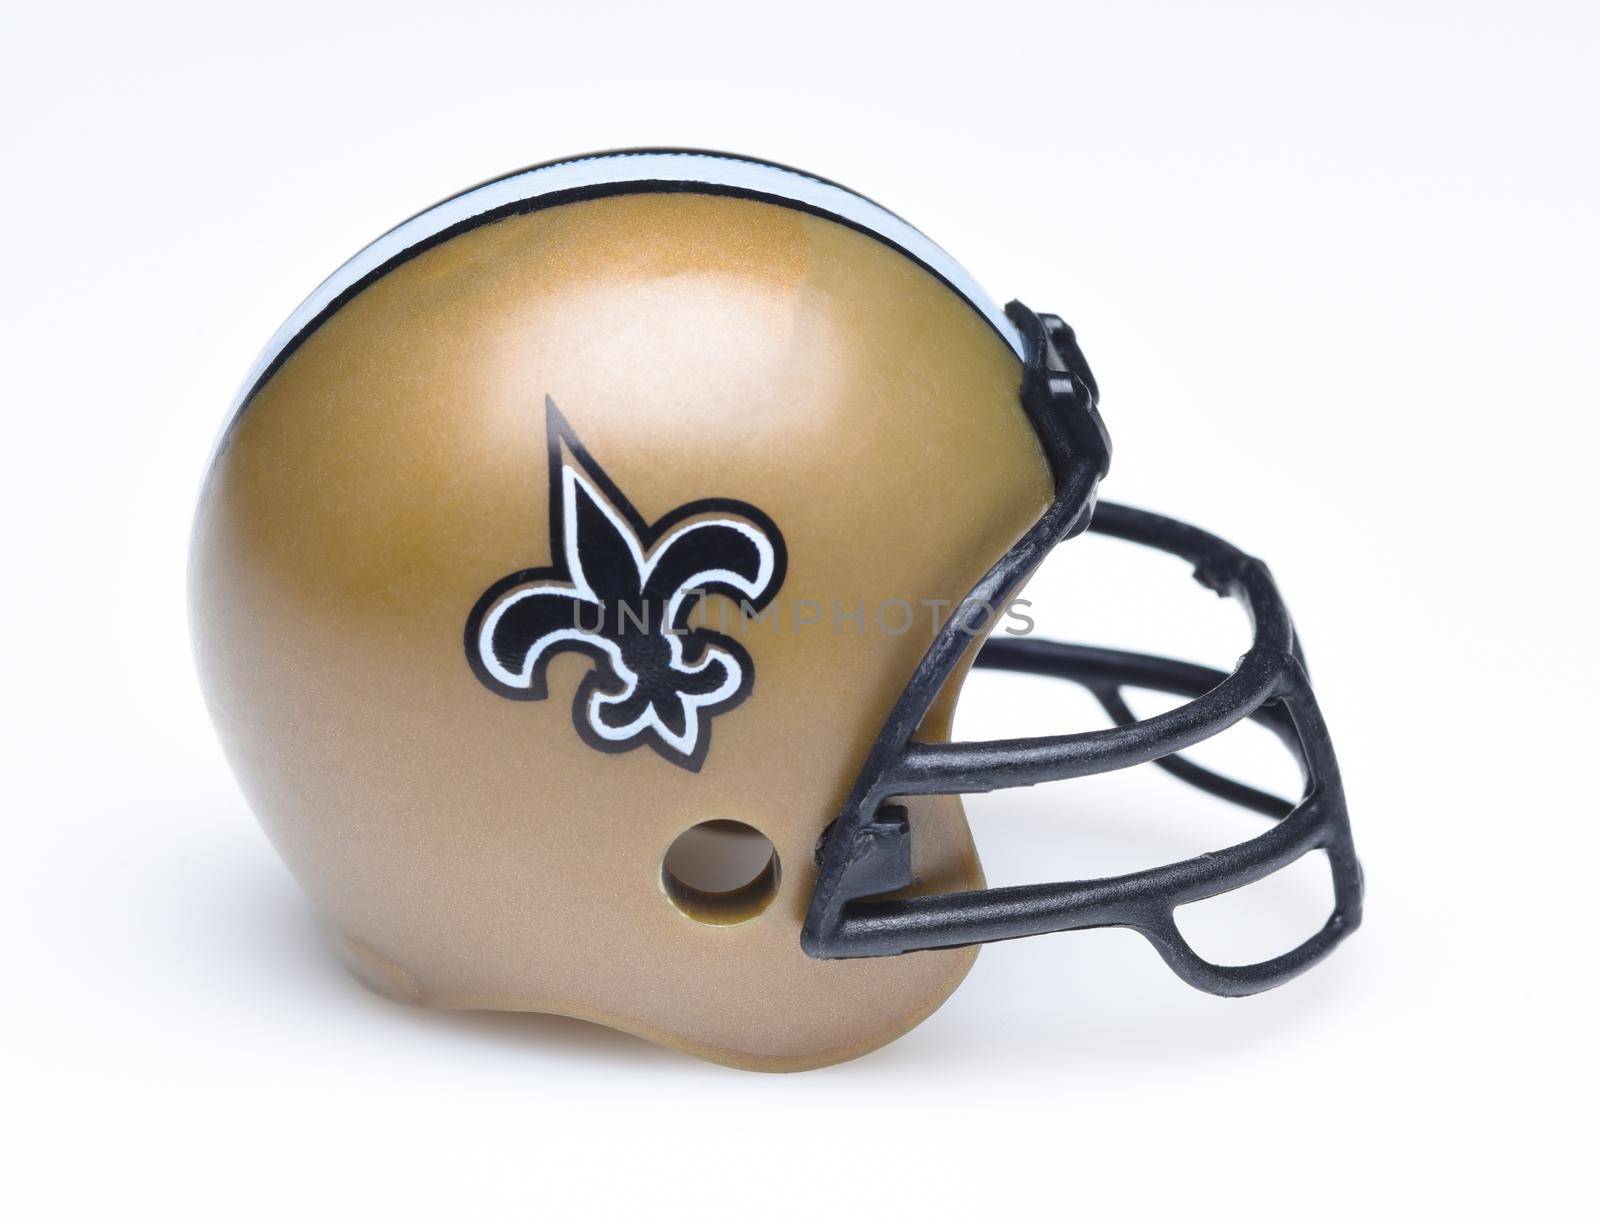 Football Helmet for the New Orleans Saints by sCukrov